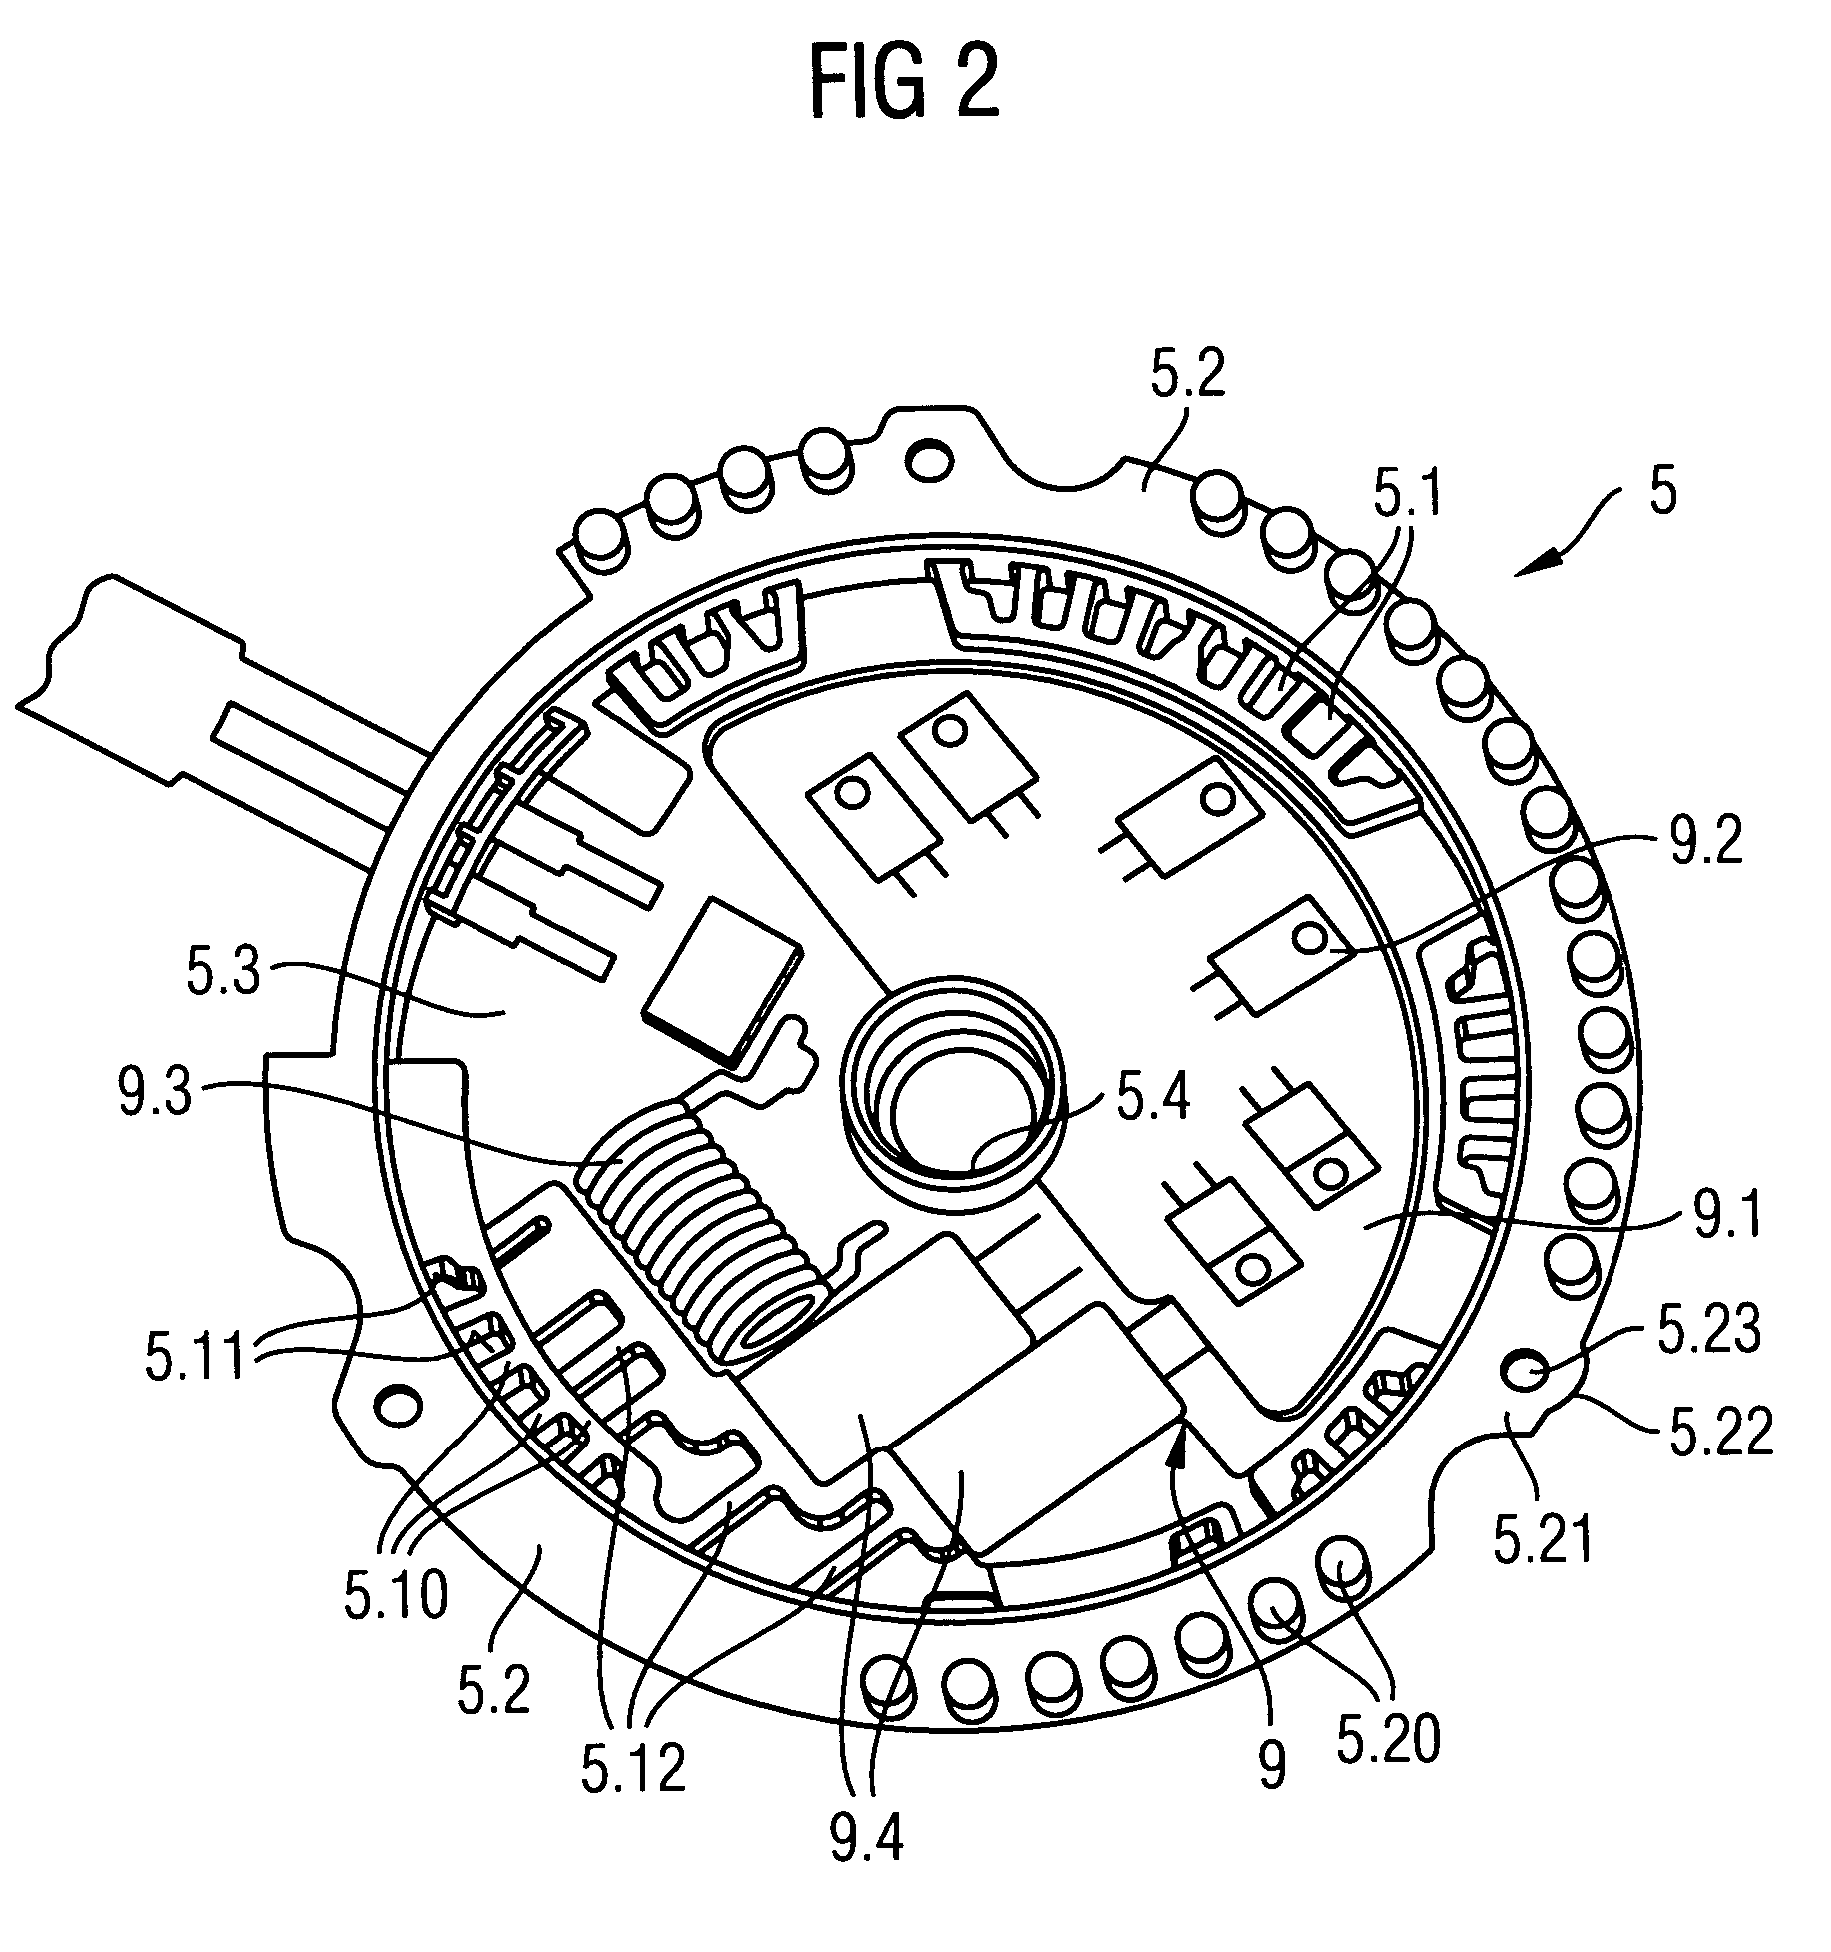 Cooling fan with electric motor